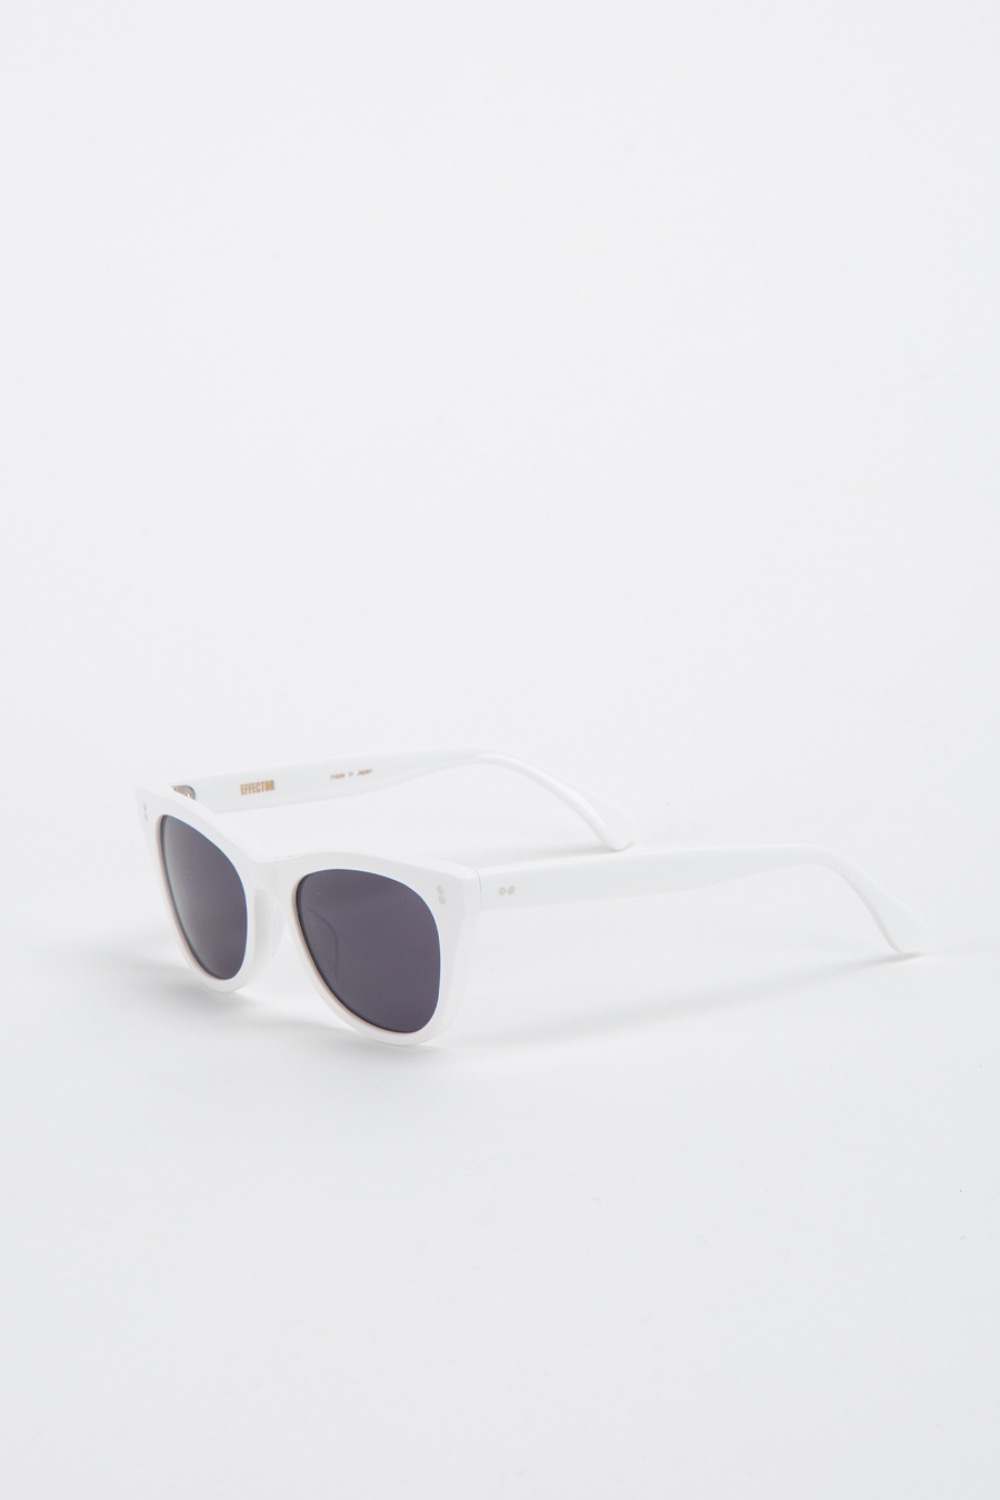 EFFECTOR x UNDERCOVER - KIMBERLY WHITE